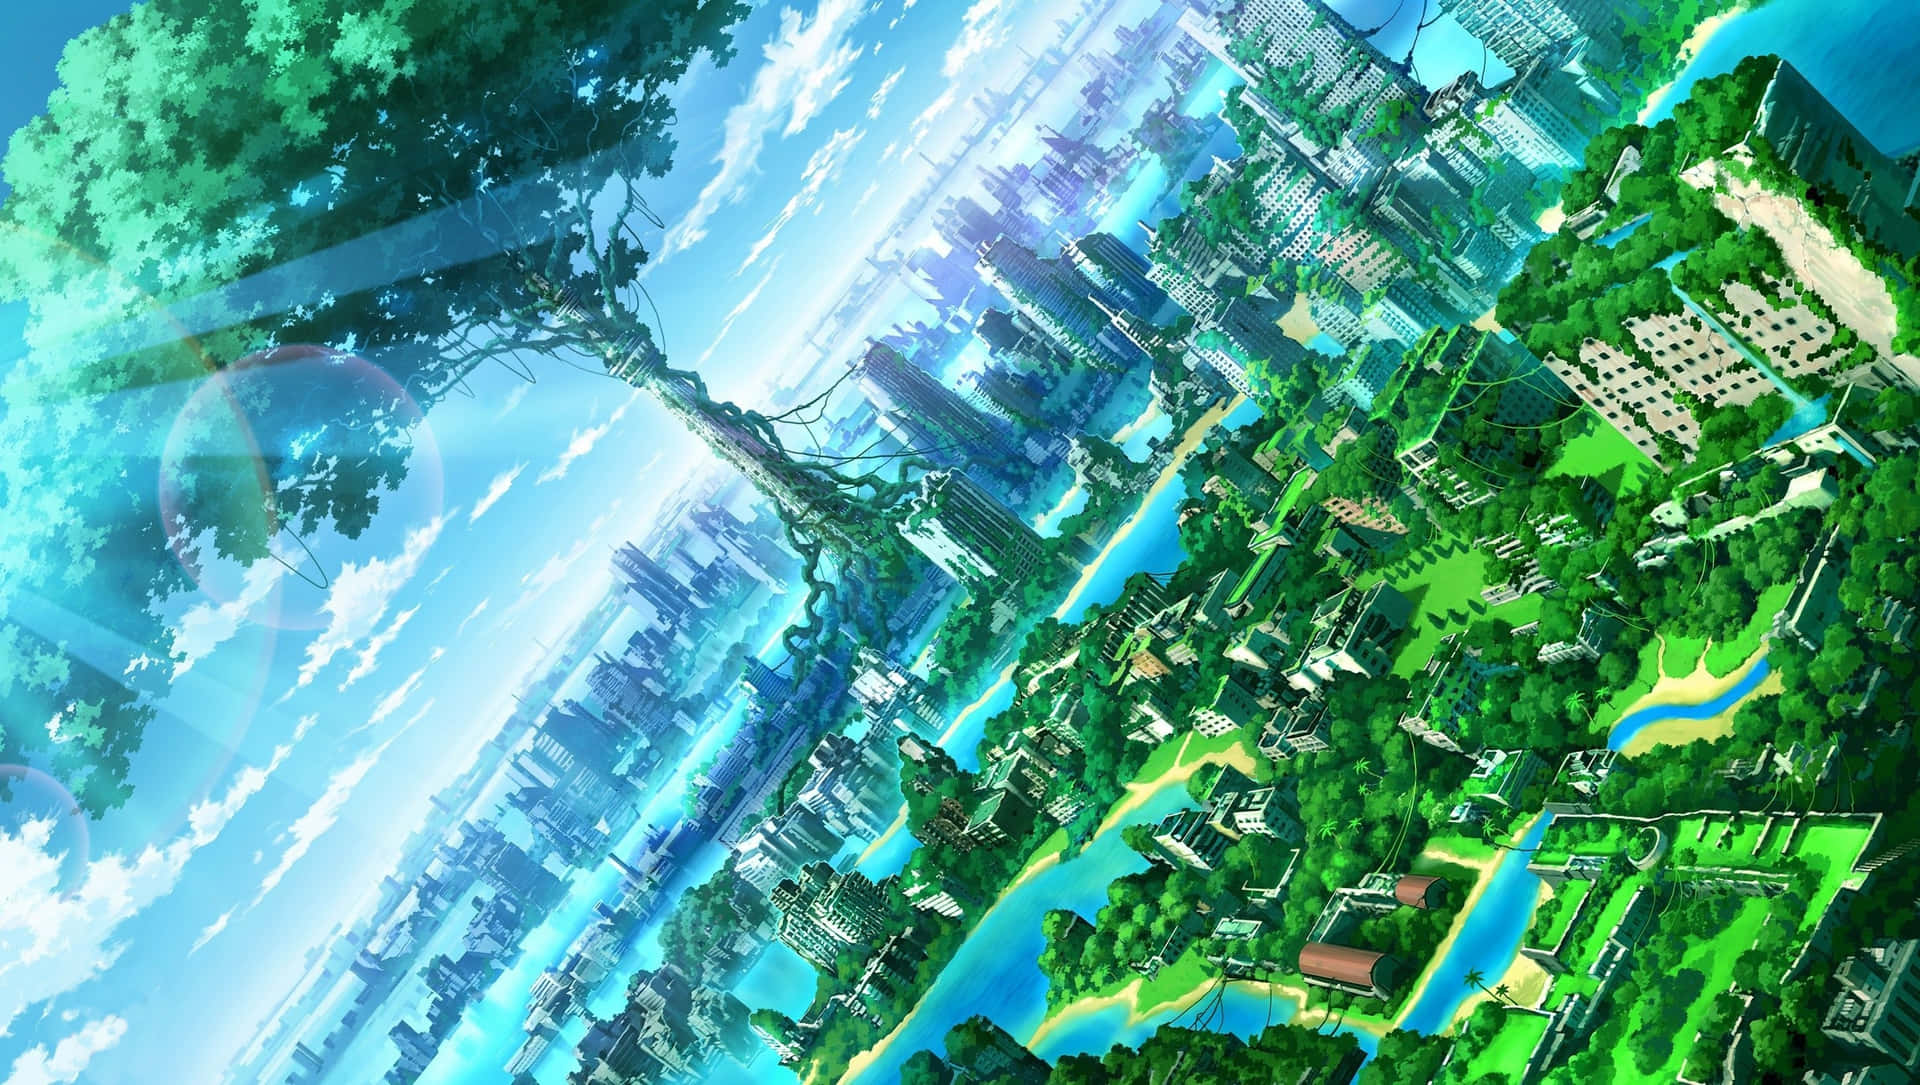 "A mesmerizing figure surrounded by a lush green landscape that defines the beauty of Green Anime" Wallpaper